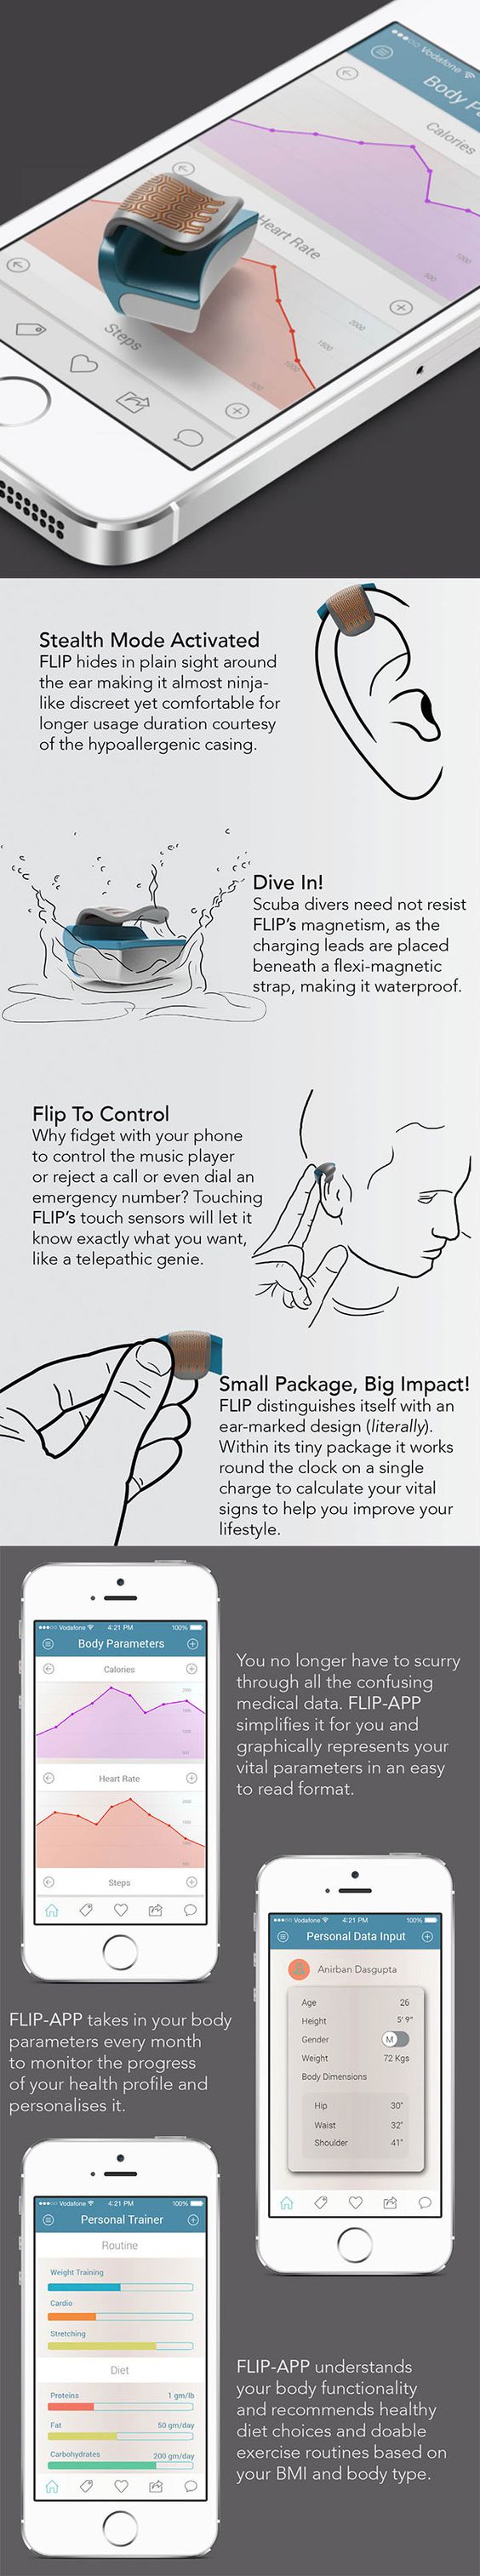 FLIP is the latest in the wearable biometric tech craze, but quite different from fitness bands and smartwatches.